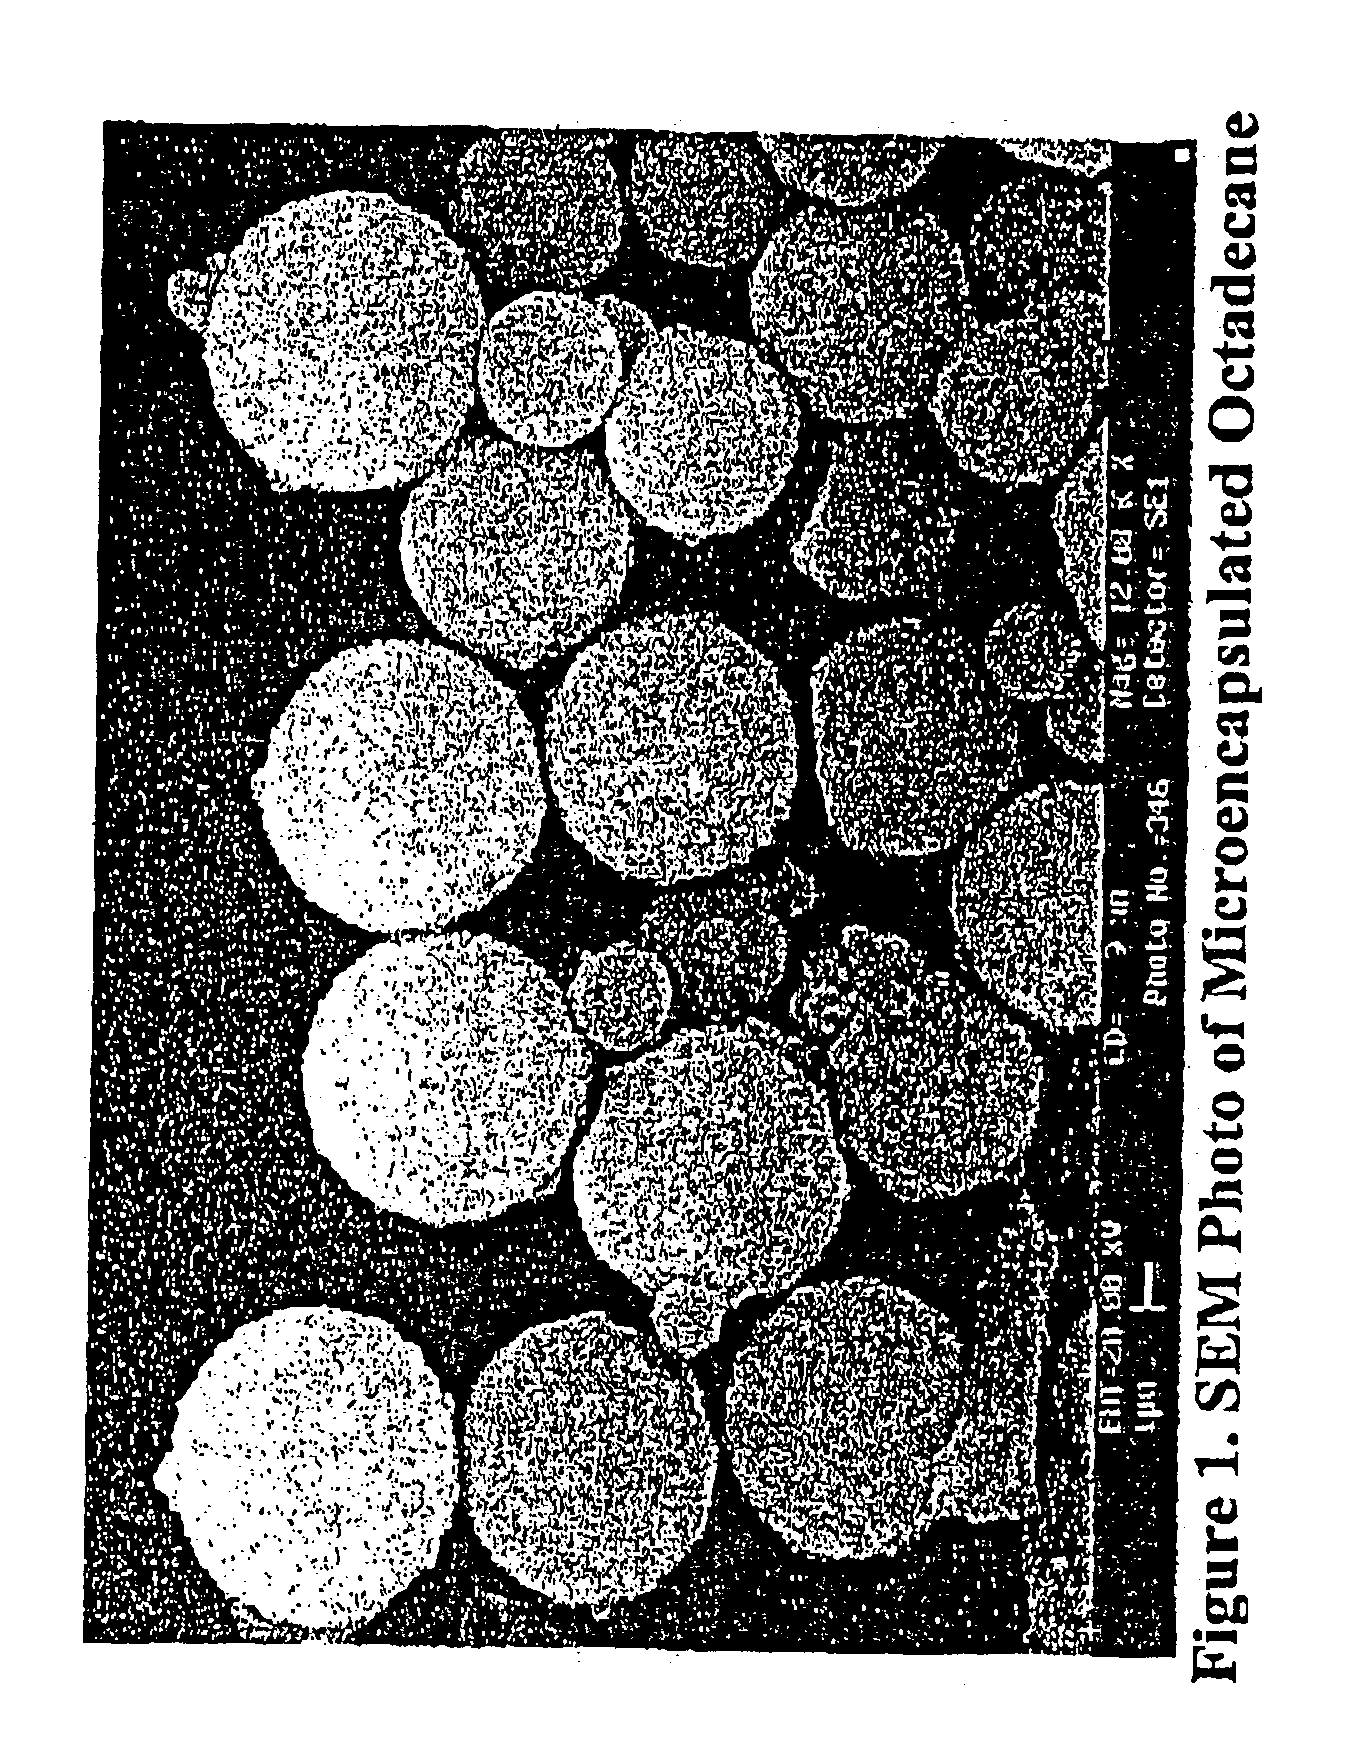 Method for encapsulating phase transitional paraffin compounds using melamine-formaldehyde and microcapsule resulting therefrom